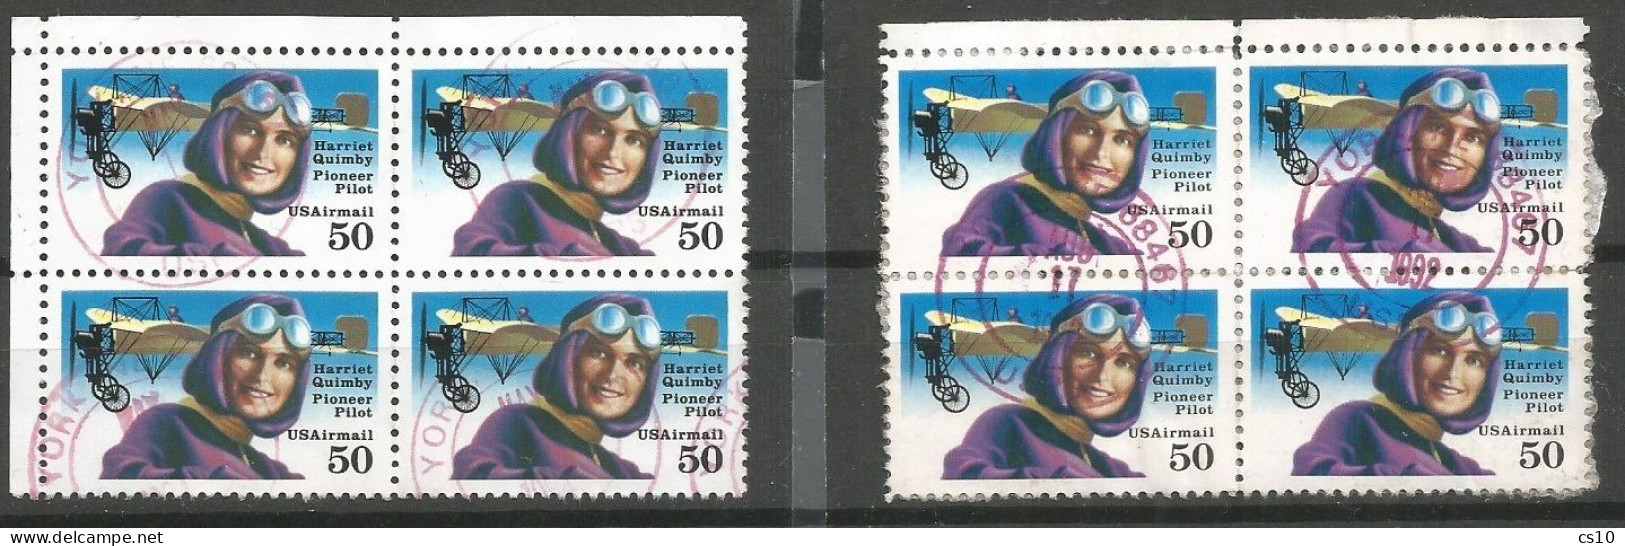 USA 1991 Aviation Pioneers C.50 Harriet Quimby Airmail SC.# C128 In #2 Used Blocks4 Perforation Line + Comb !!! - Collections